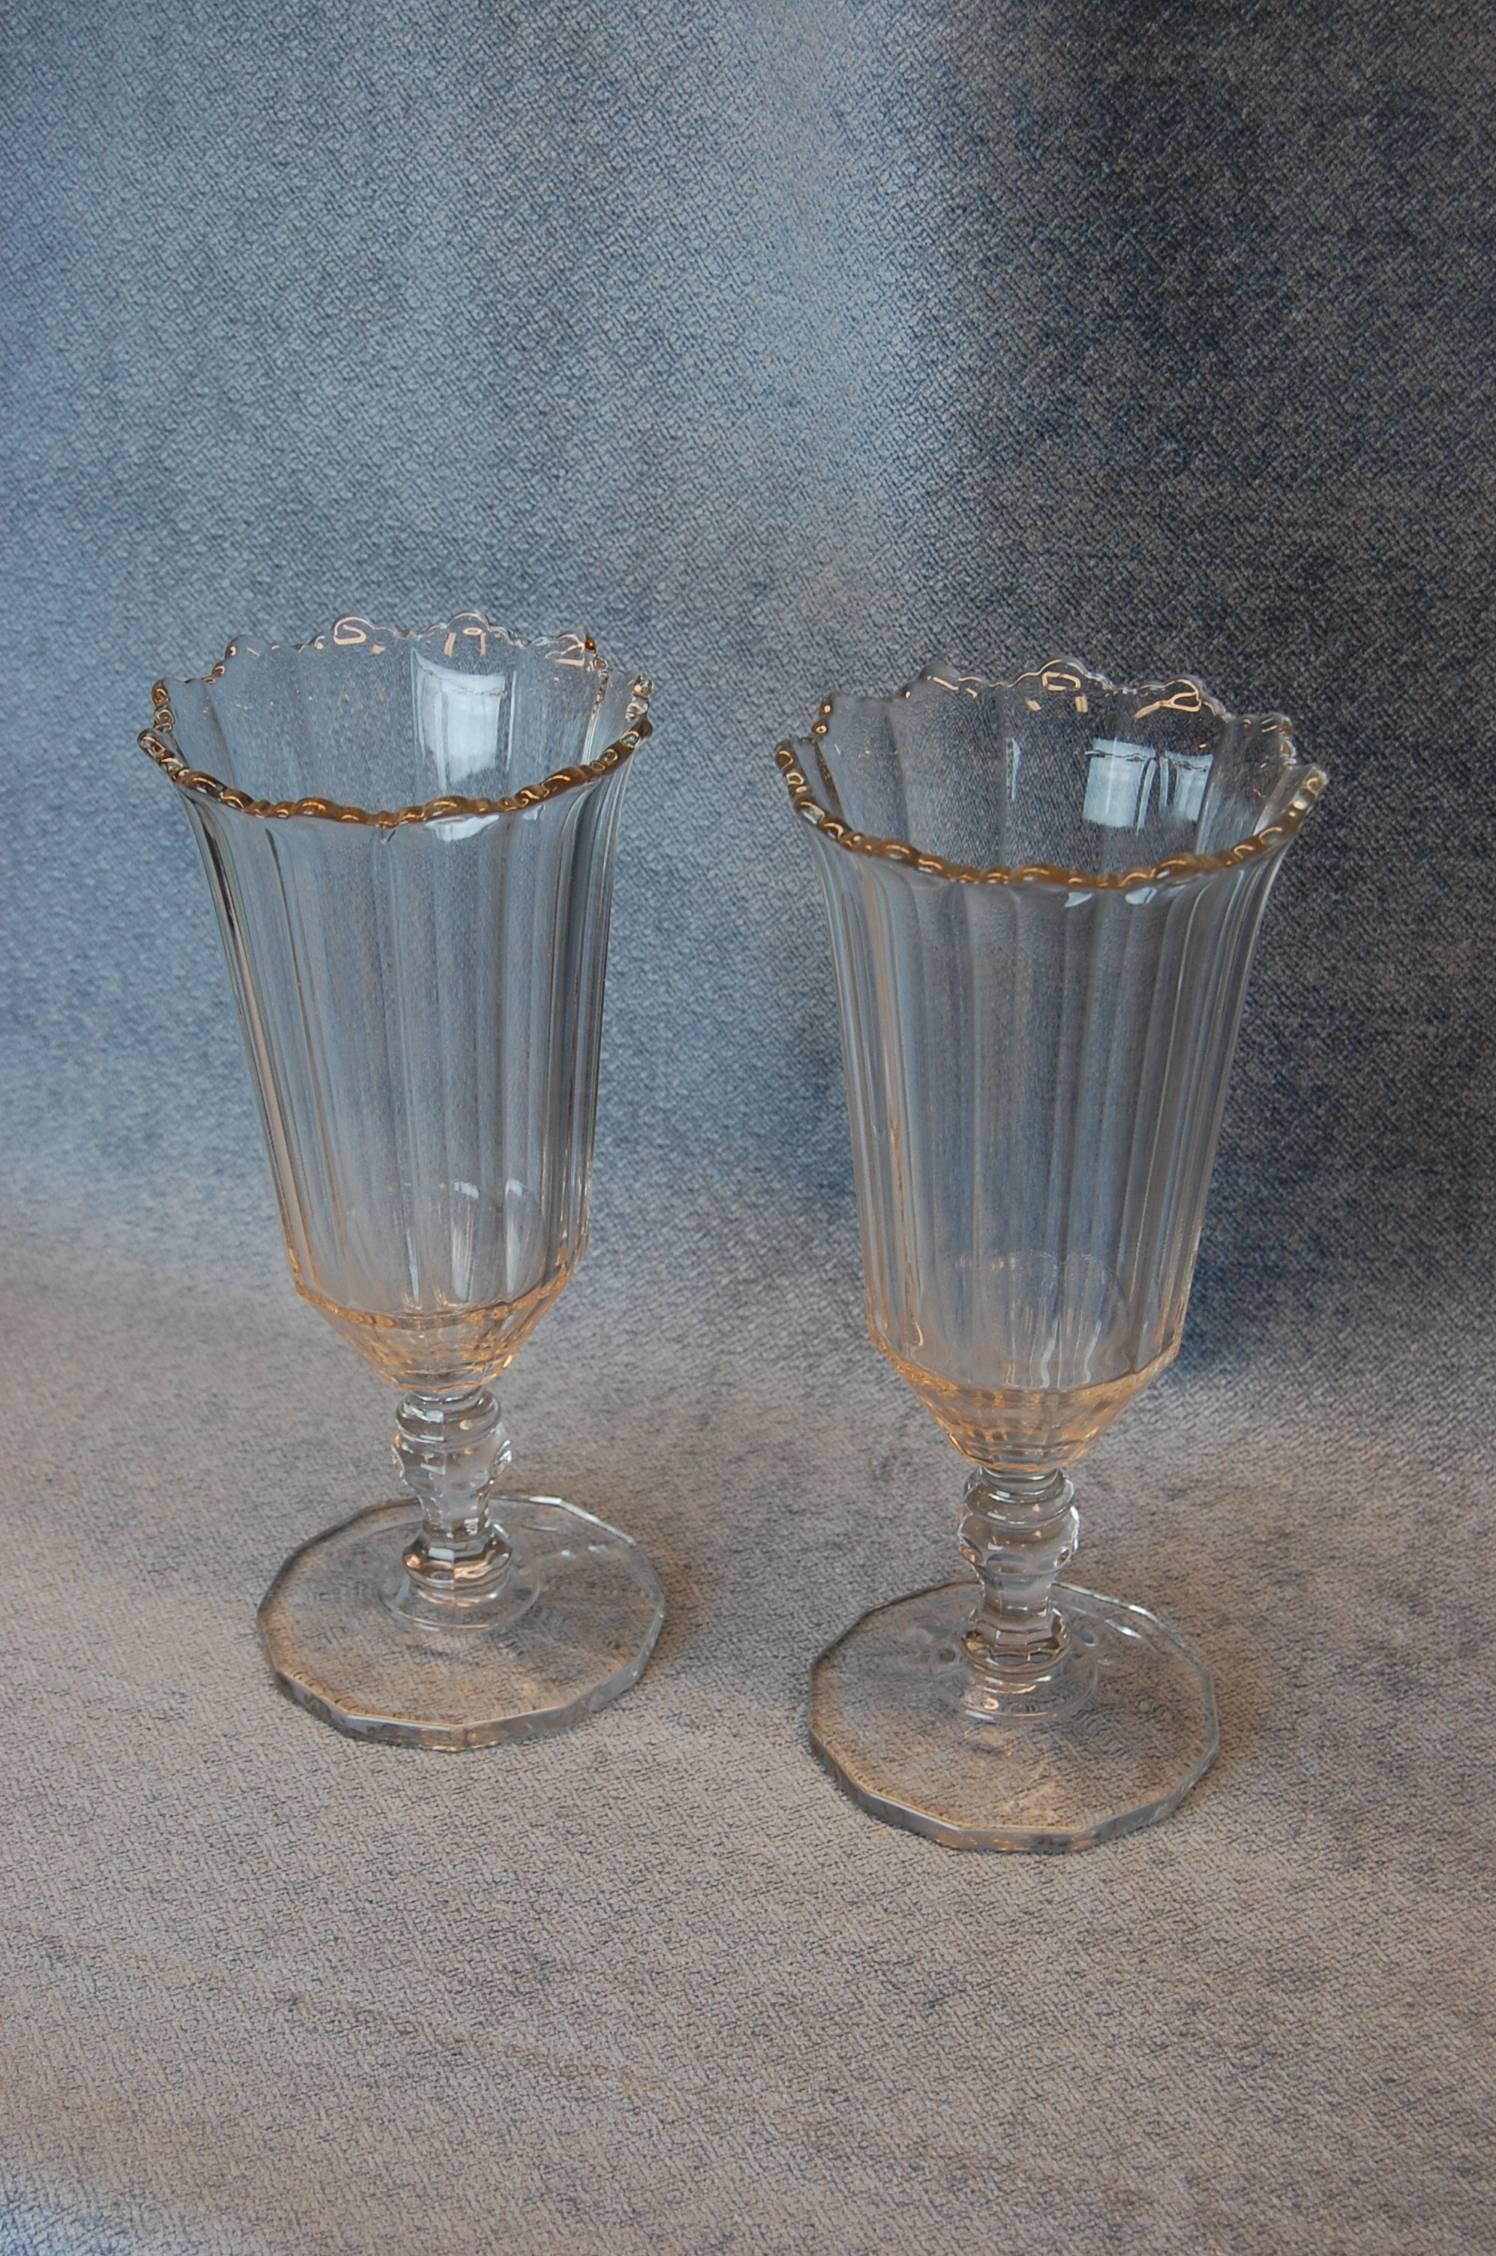 Pair of clear glass vases standing 9 3/8 inches tall, 4 1/4 inch top diameter. Excellent condition.